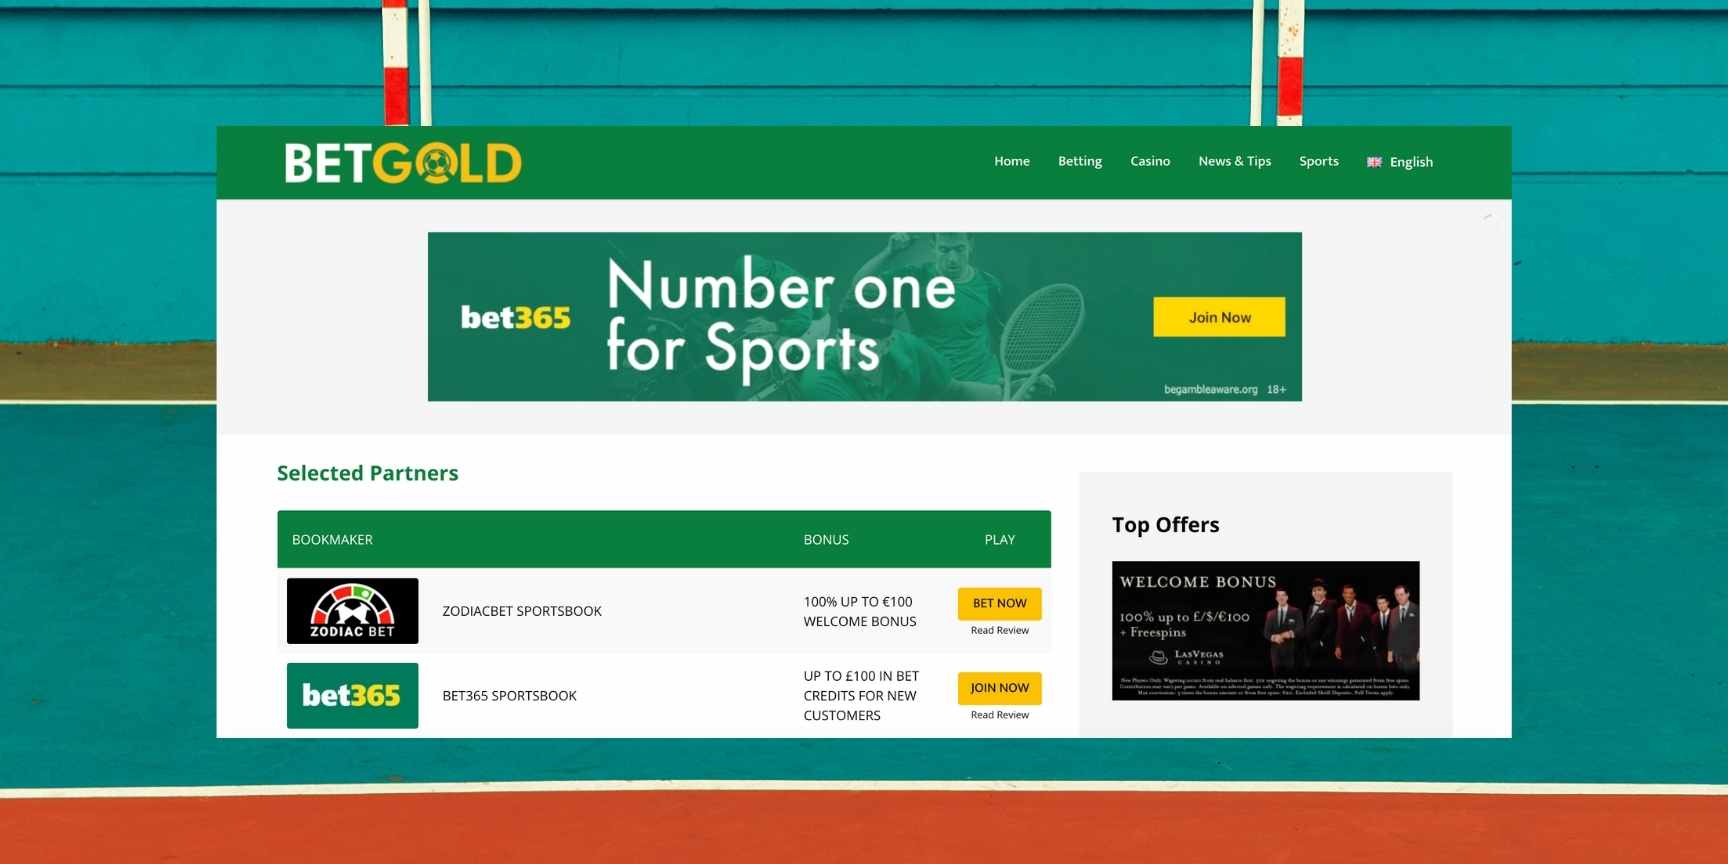 betgold features